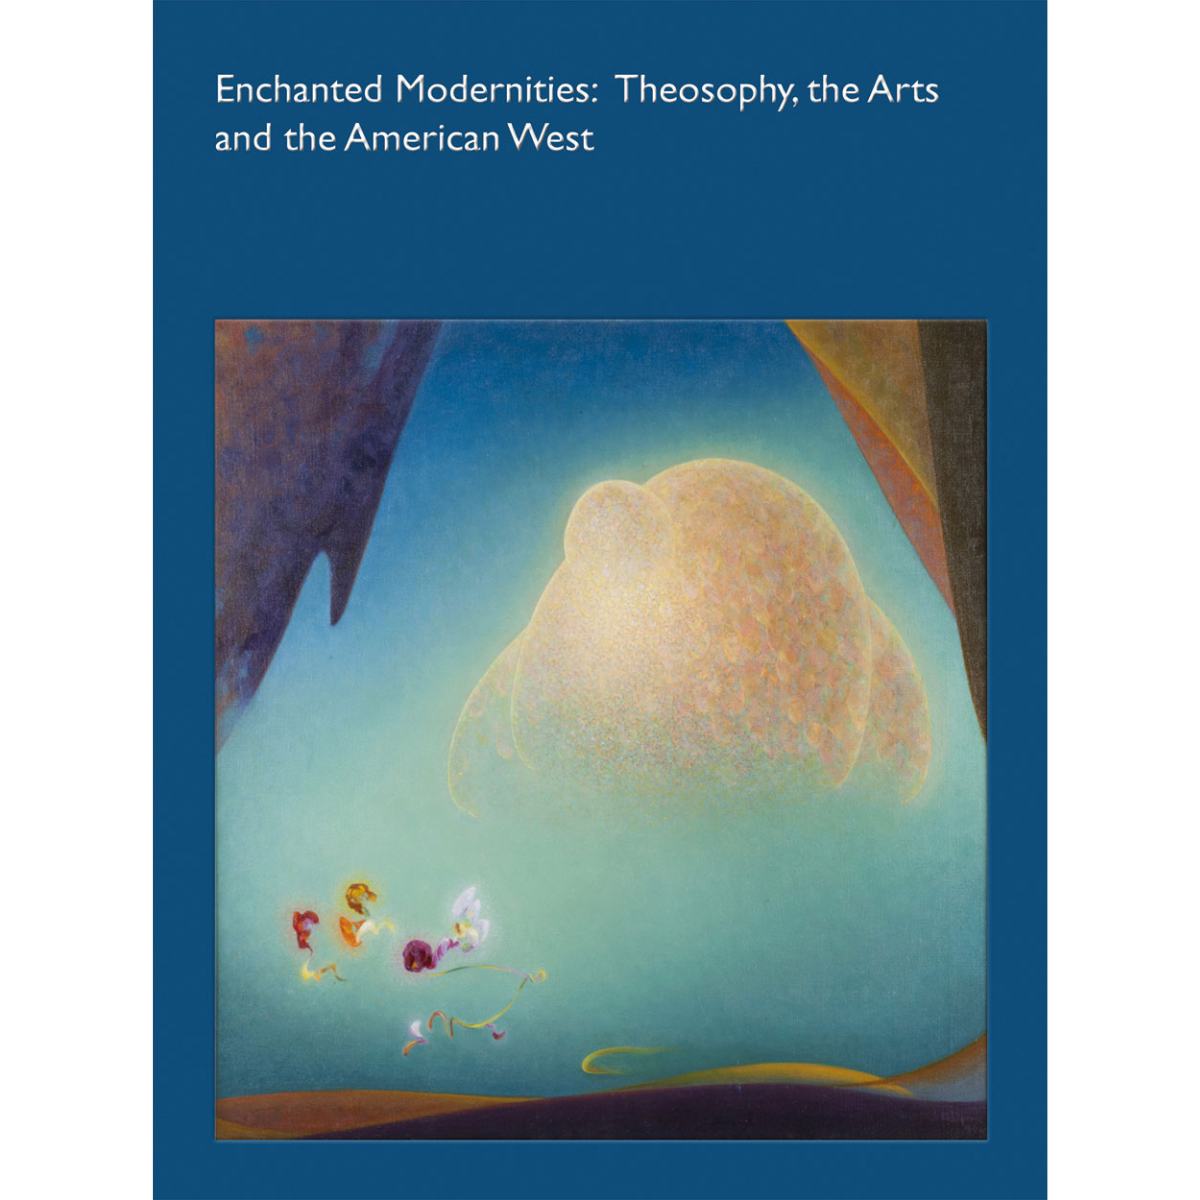 Enchanted Modernities: Theosophy, the Arts and the American West